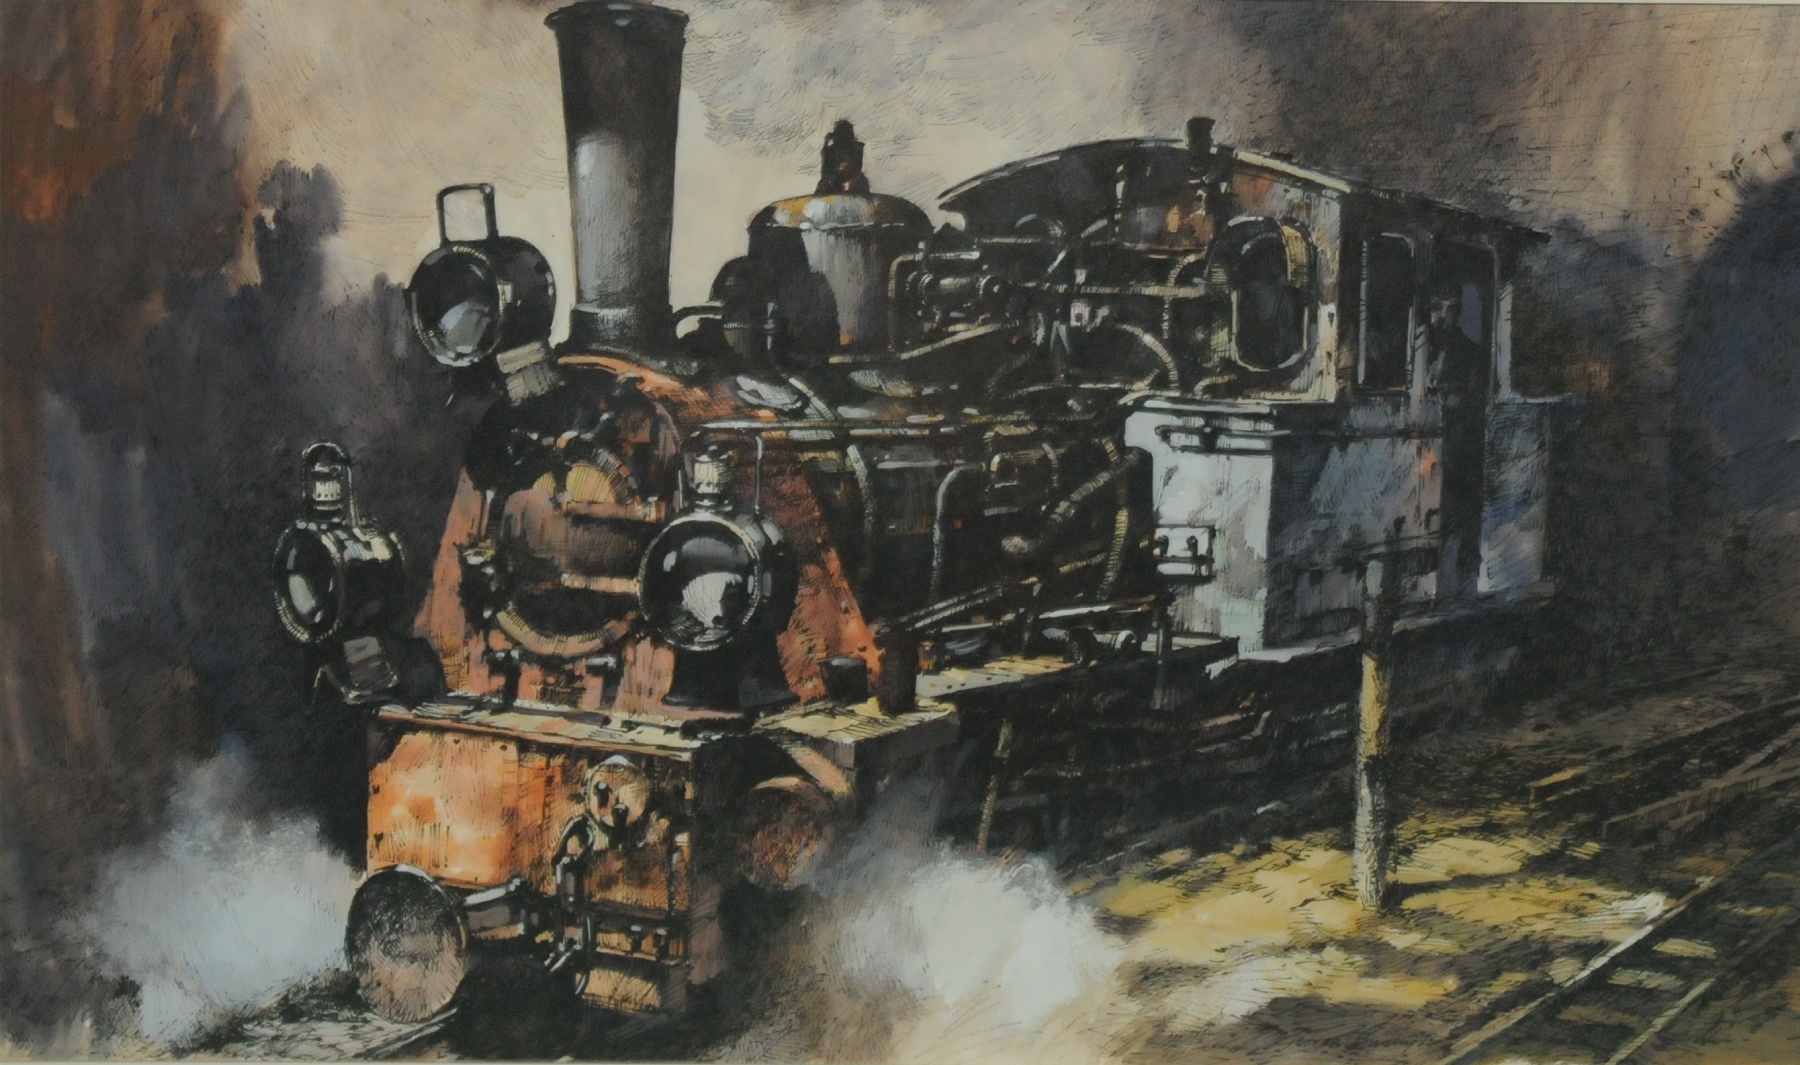 GEORGE BUSBY.
Jung locomotive, Llanberis.
Pen, ink & watercolour.
13" x 21¾". Signed & dated (19)